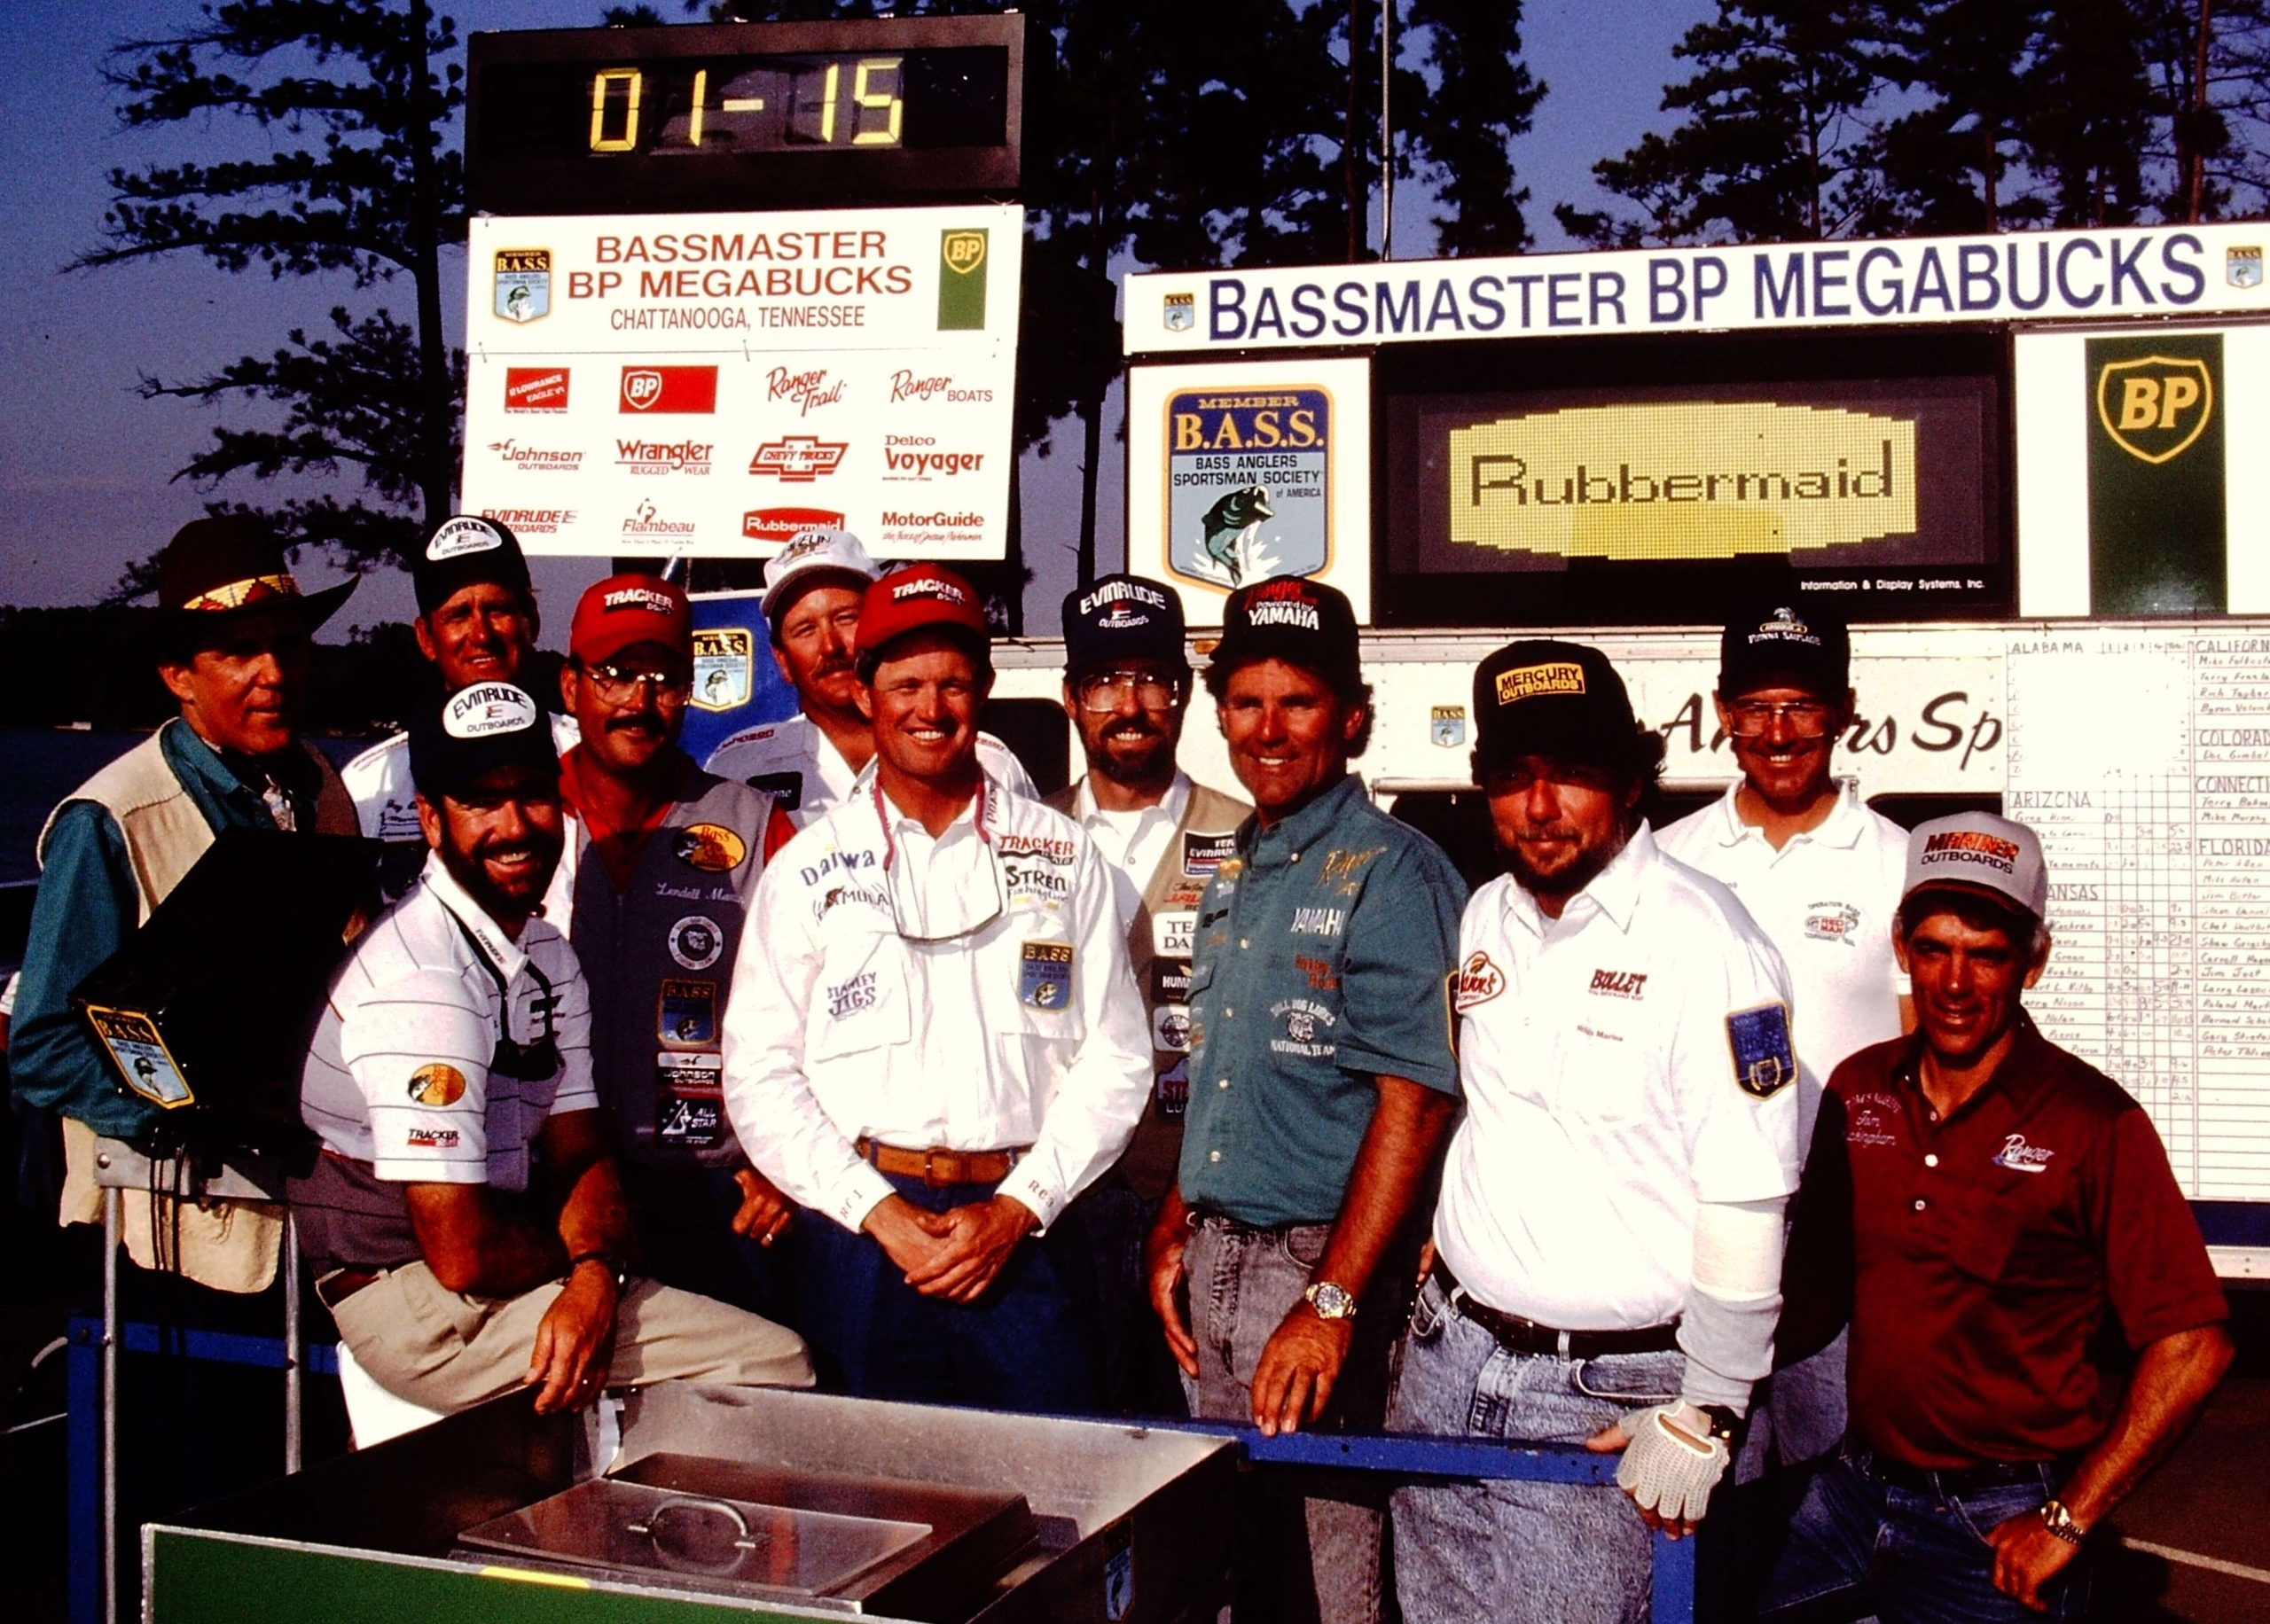 Pictured with Ray Scott are the Top 10 competitors the last time B.A.S.S. visited Chickamauga. The only one among them who is competing in BASSfest is Rick Clunn. Others who fished in 1991 and will be also competing in BASSfest include VanDam (10th), Grigsby (13th), Rowland (14th), Mark Davis (17th), Gary Klein (18th), Tommy Biffle (19th), Bernie Schultz (26th), Alton Jones (63rd), Paul Elias (114th), Kenyon Hill (131st) and Byron Velvick (137th).